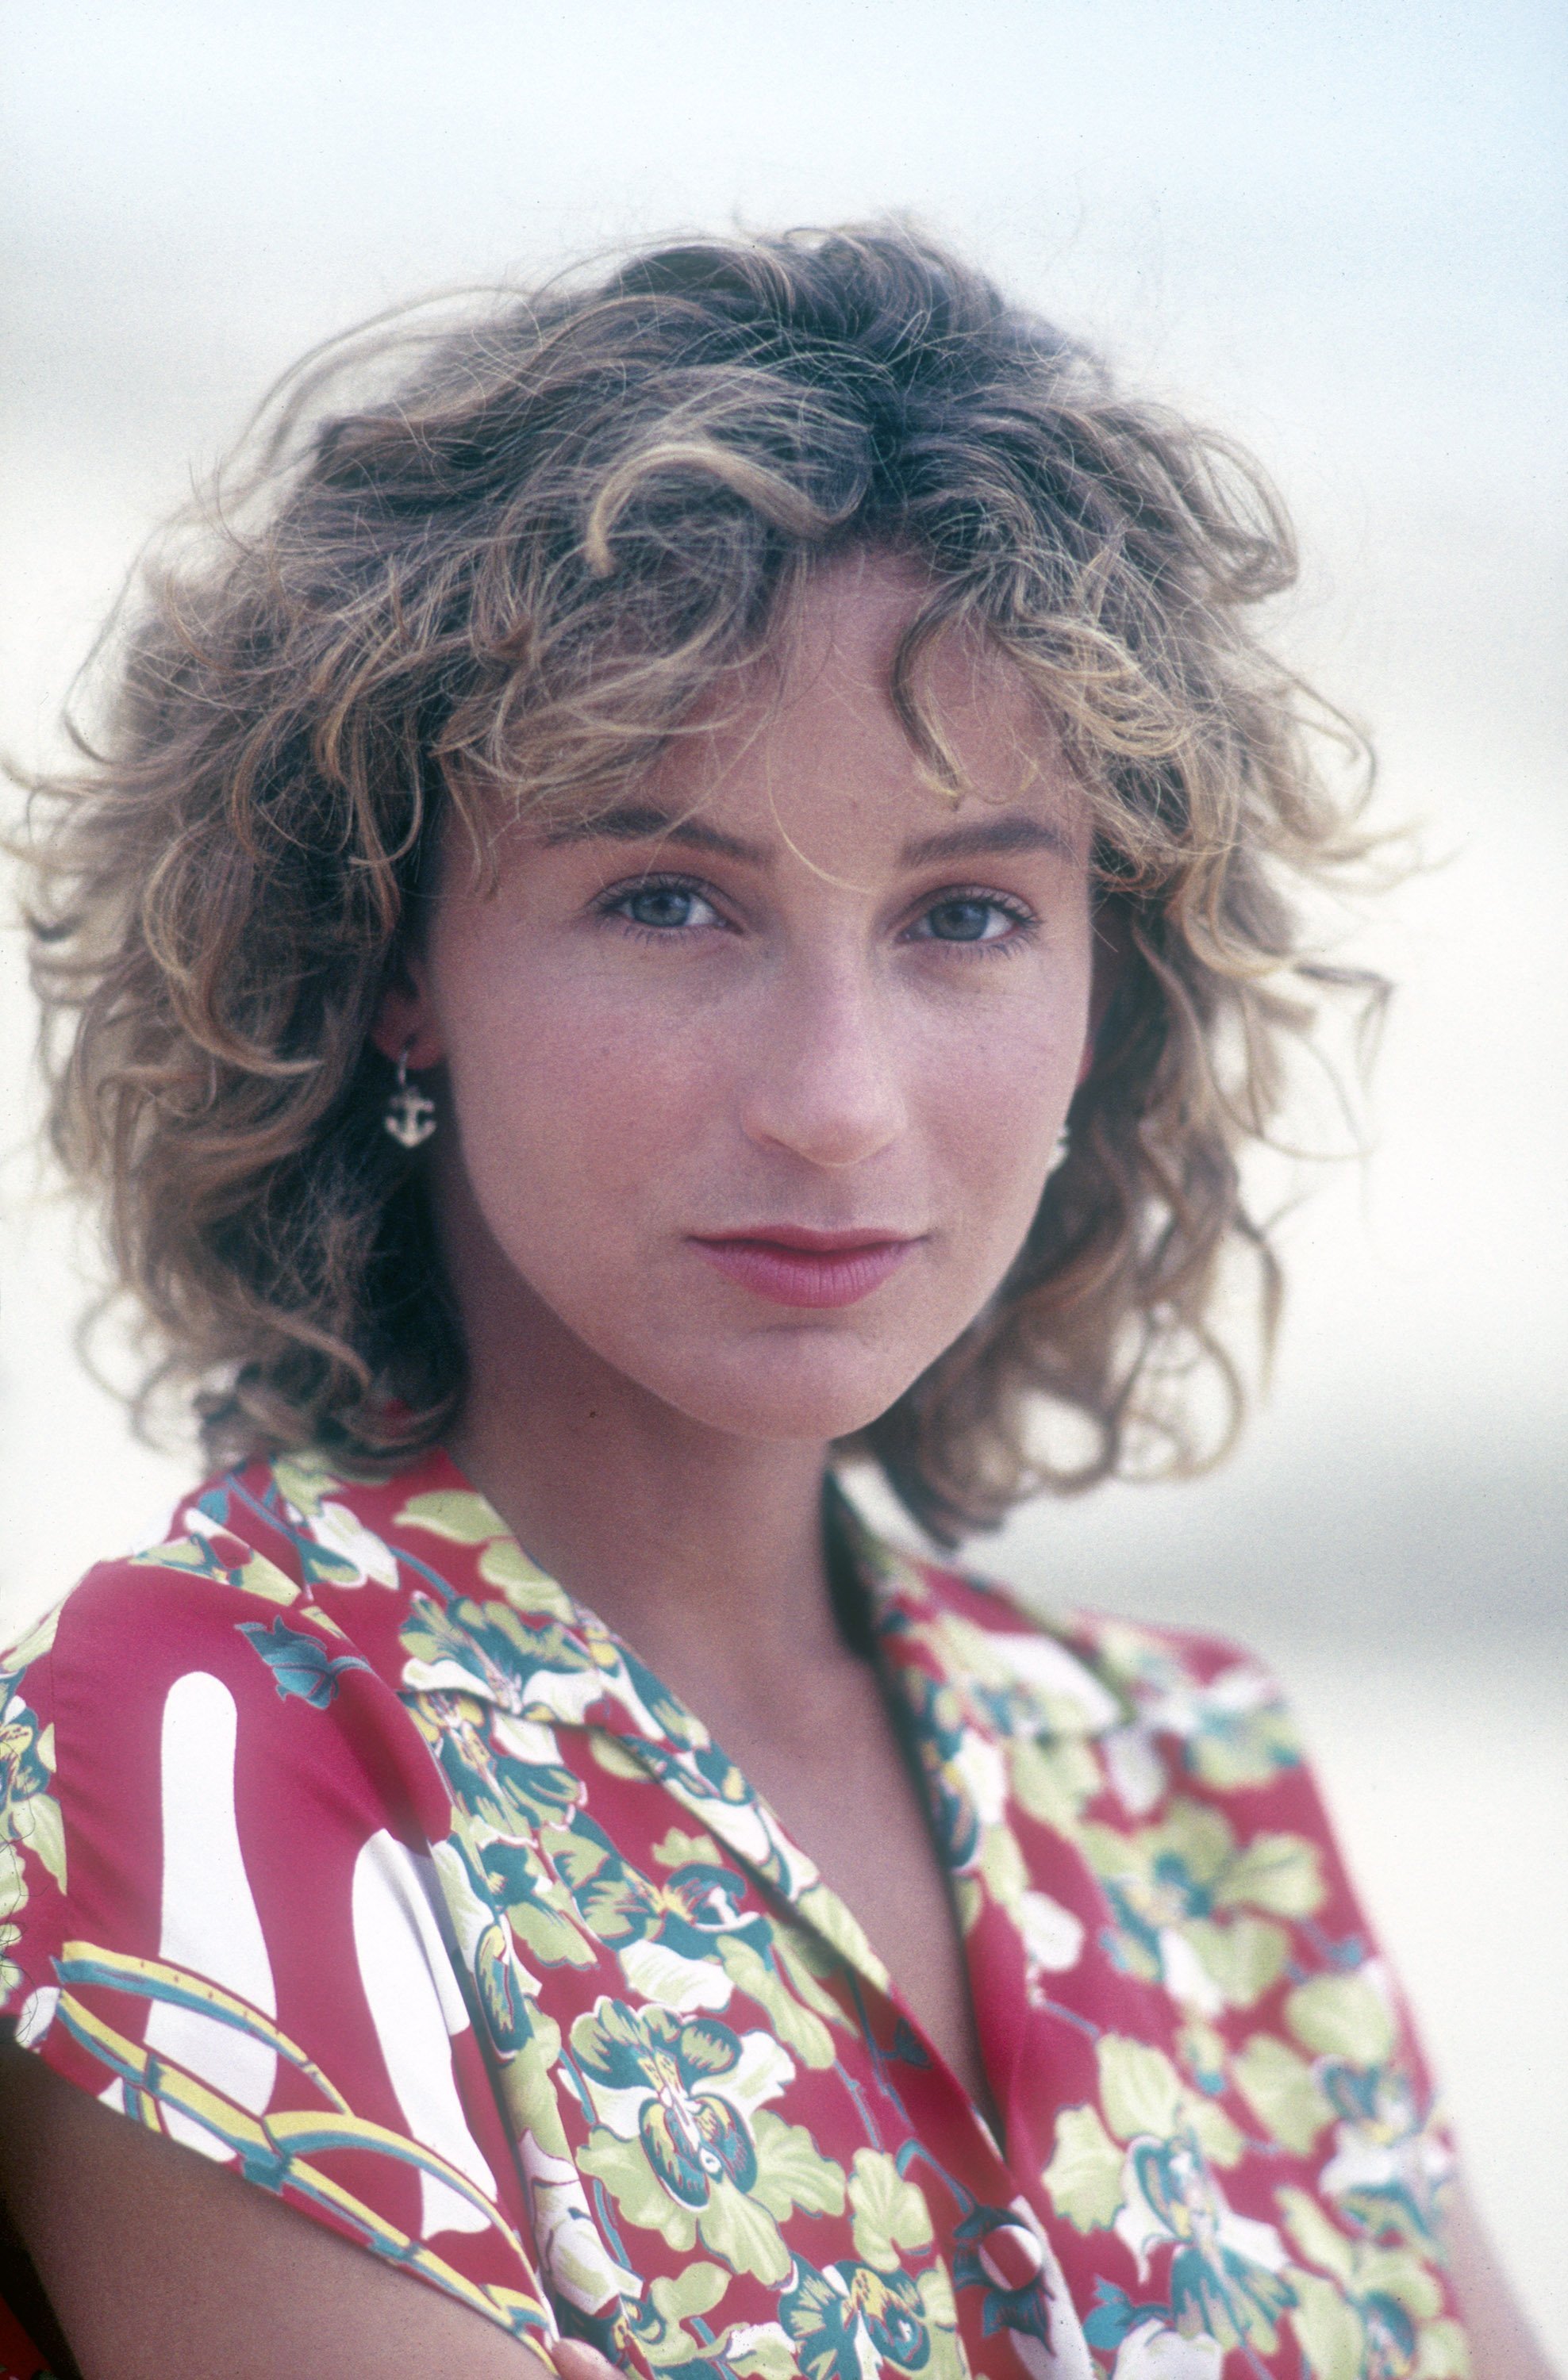 Actress Jennifer Grey in her younger days | Source: Getty Images